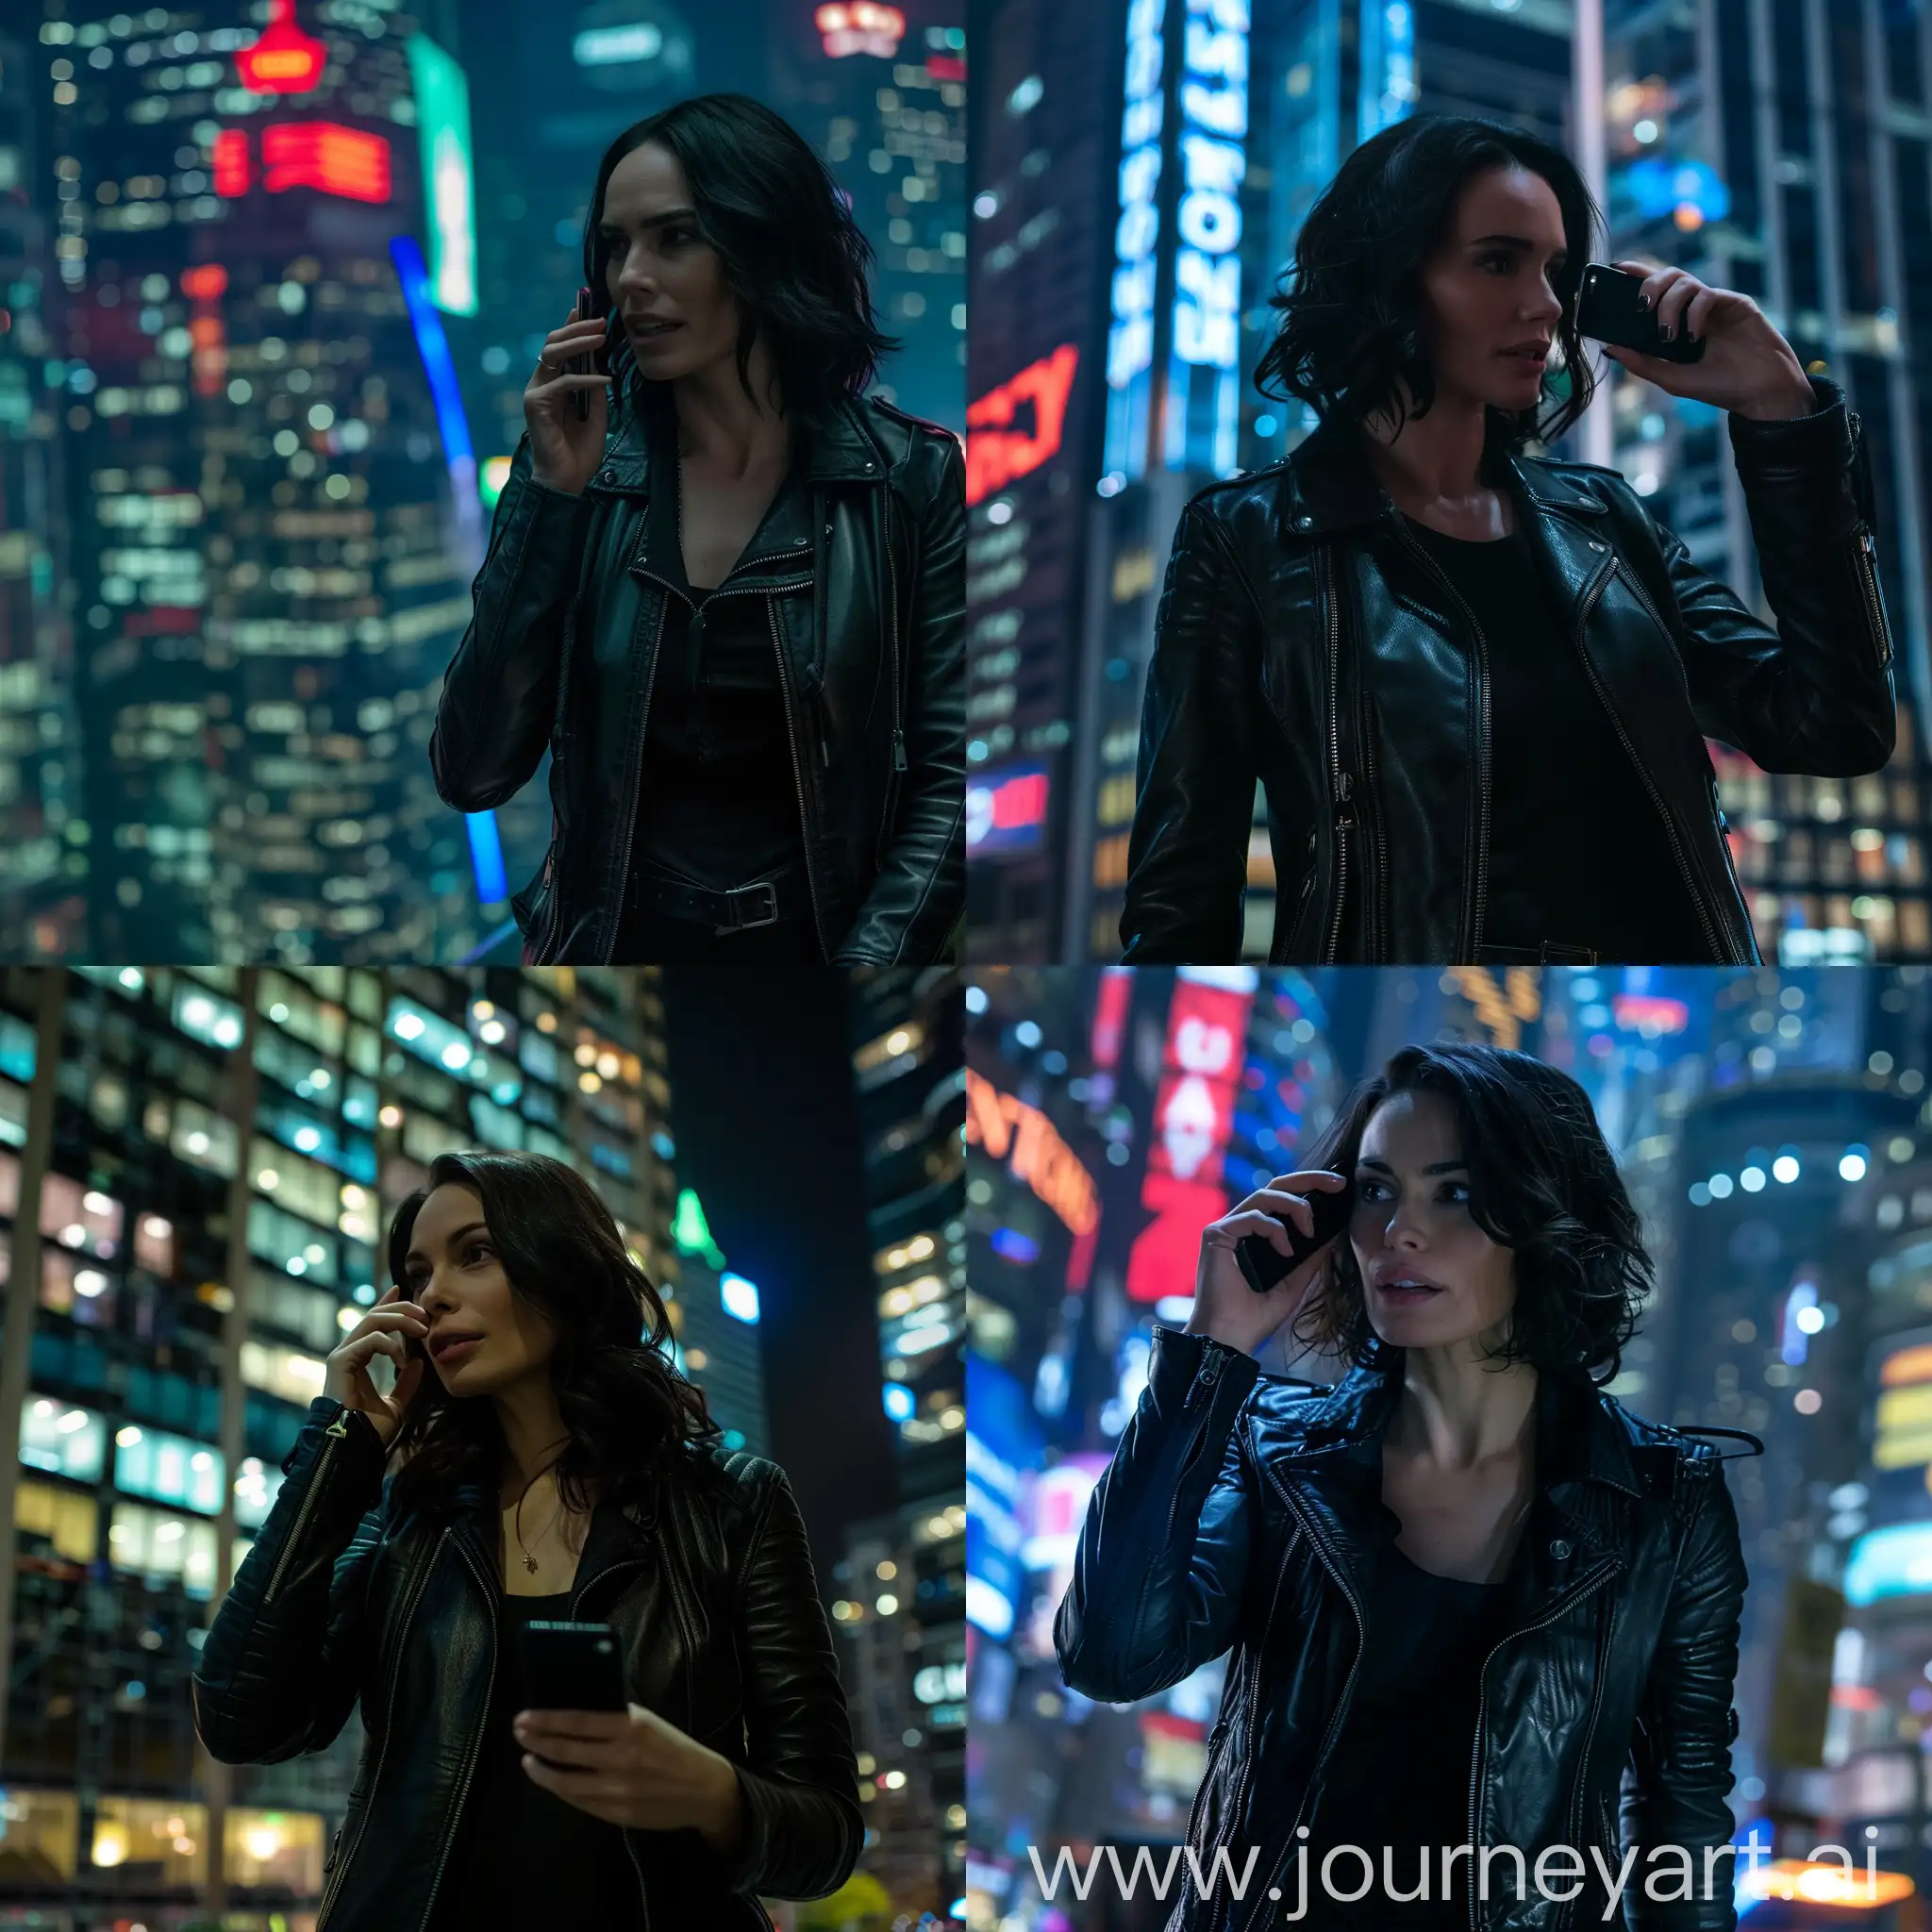 Lena Headey-like brunette in a black leather jacket talking on a smartphone in the background of the night metropolis.